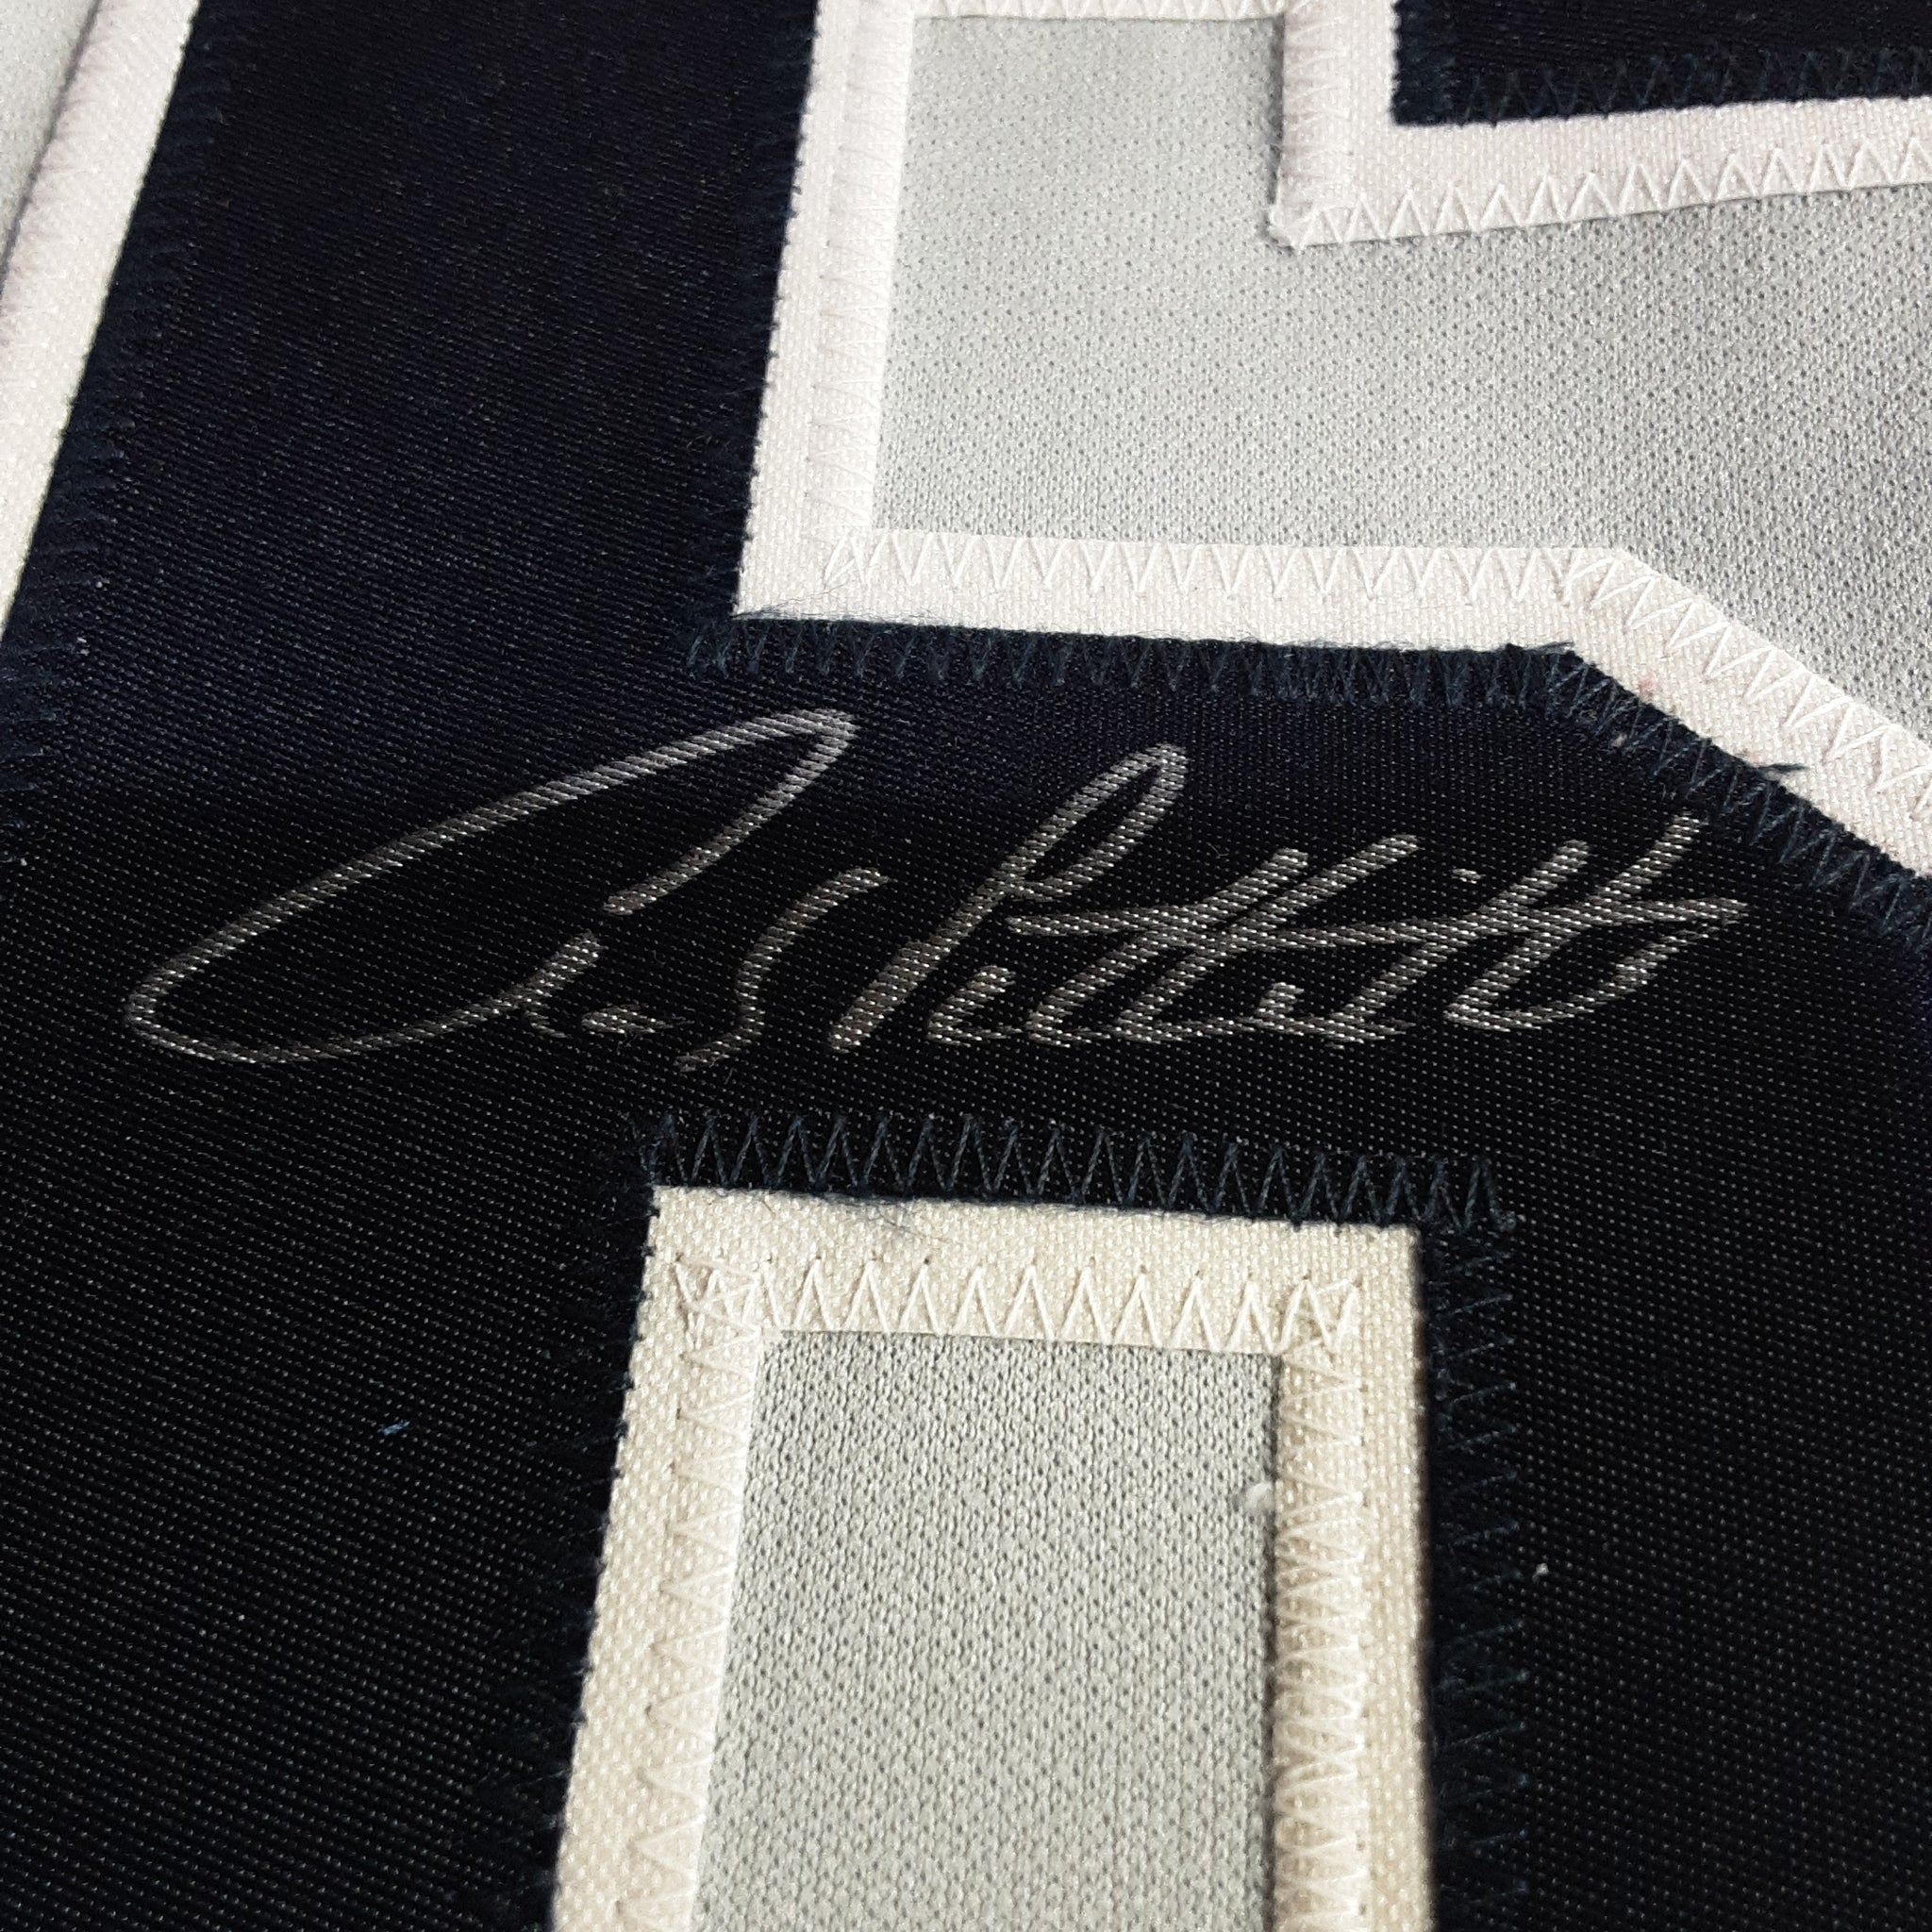 Andy Pettitte Authentic Signed Pro Style Jersey Autographed JSA